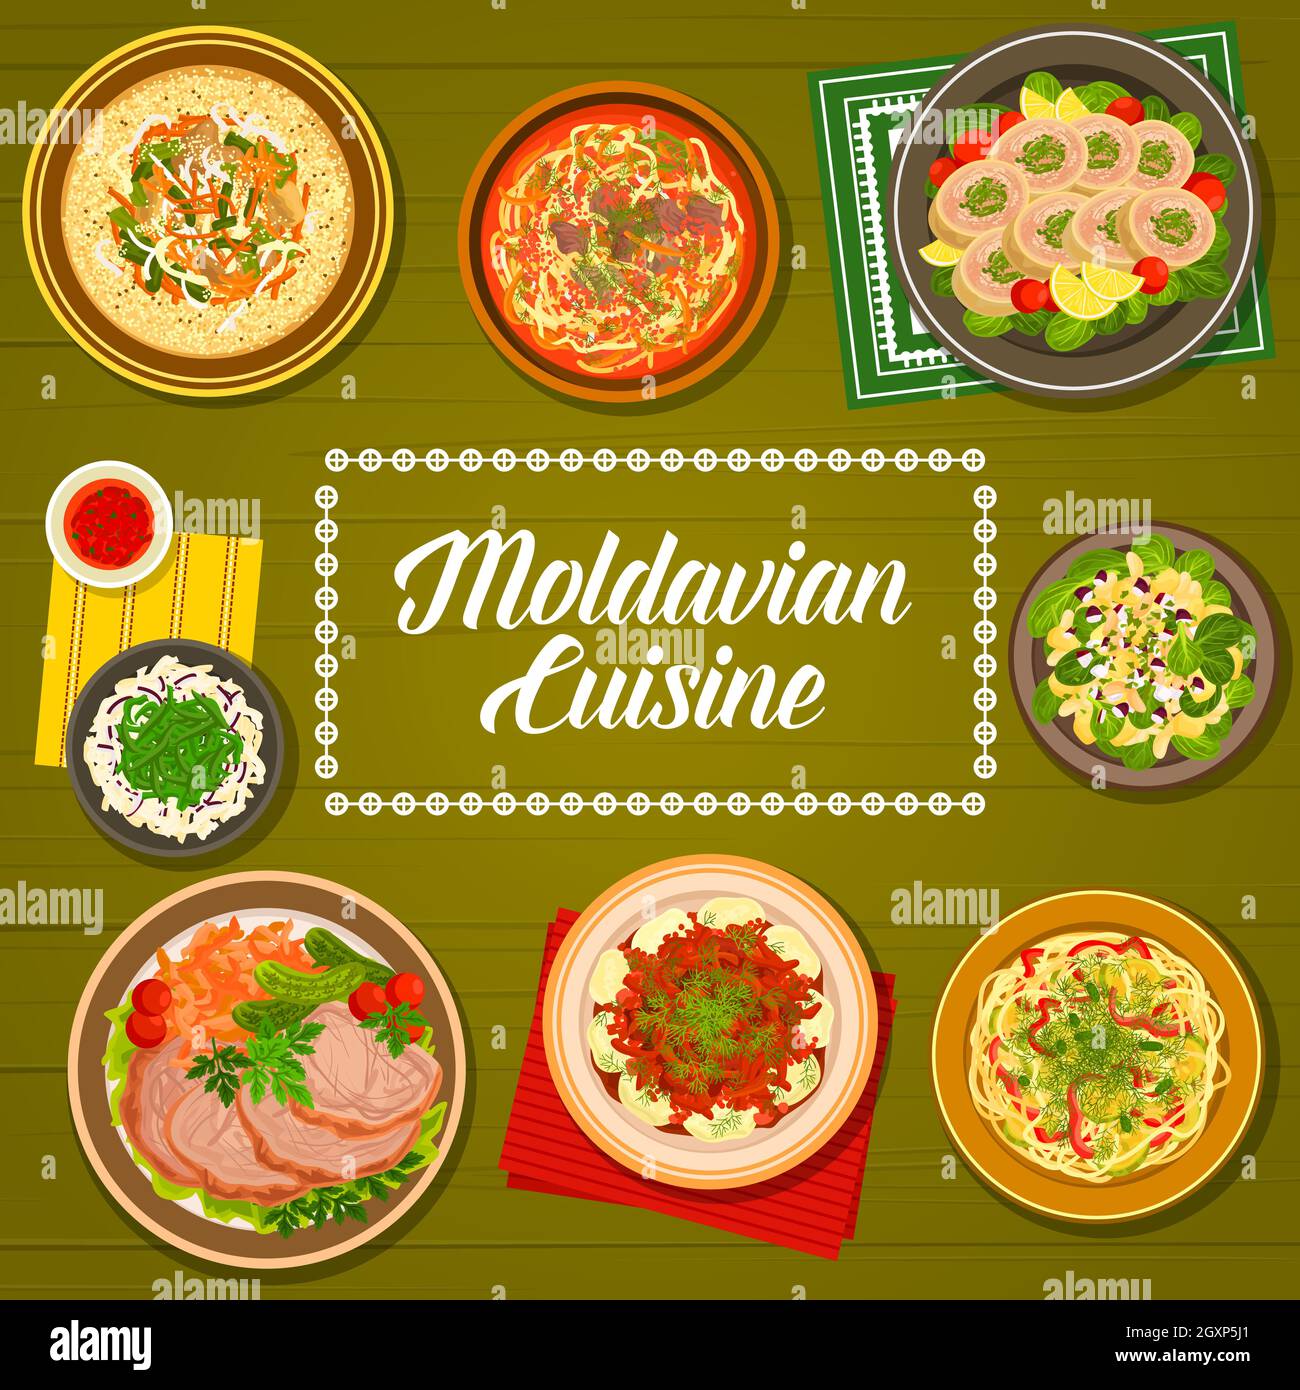 Moldovan cuisine menu cover, Moldavian food dishes and traditional dinner or lunch meals. Eastern Europe cuisines, Moldovan or Moldavian national food Stock Vector